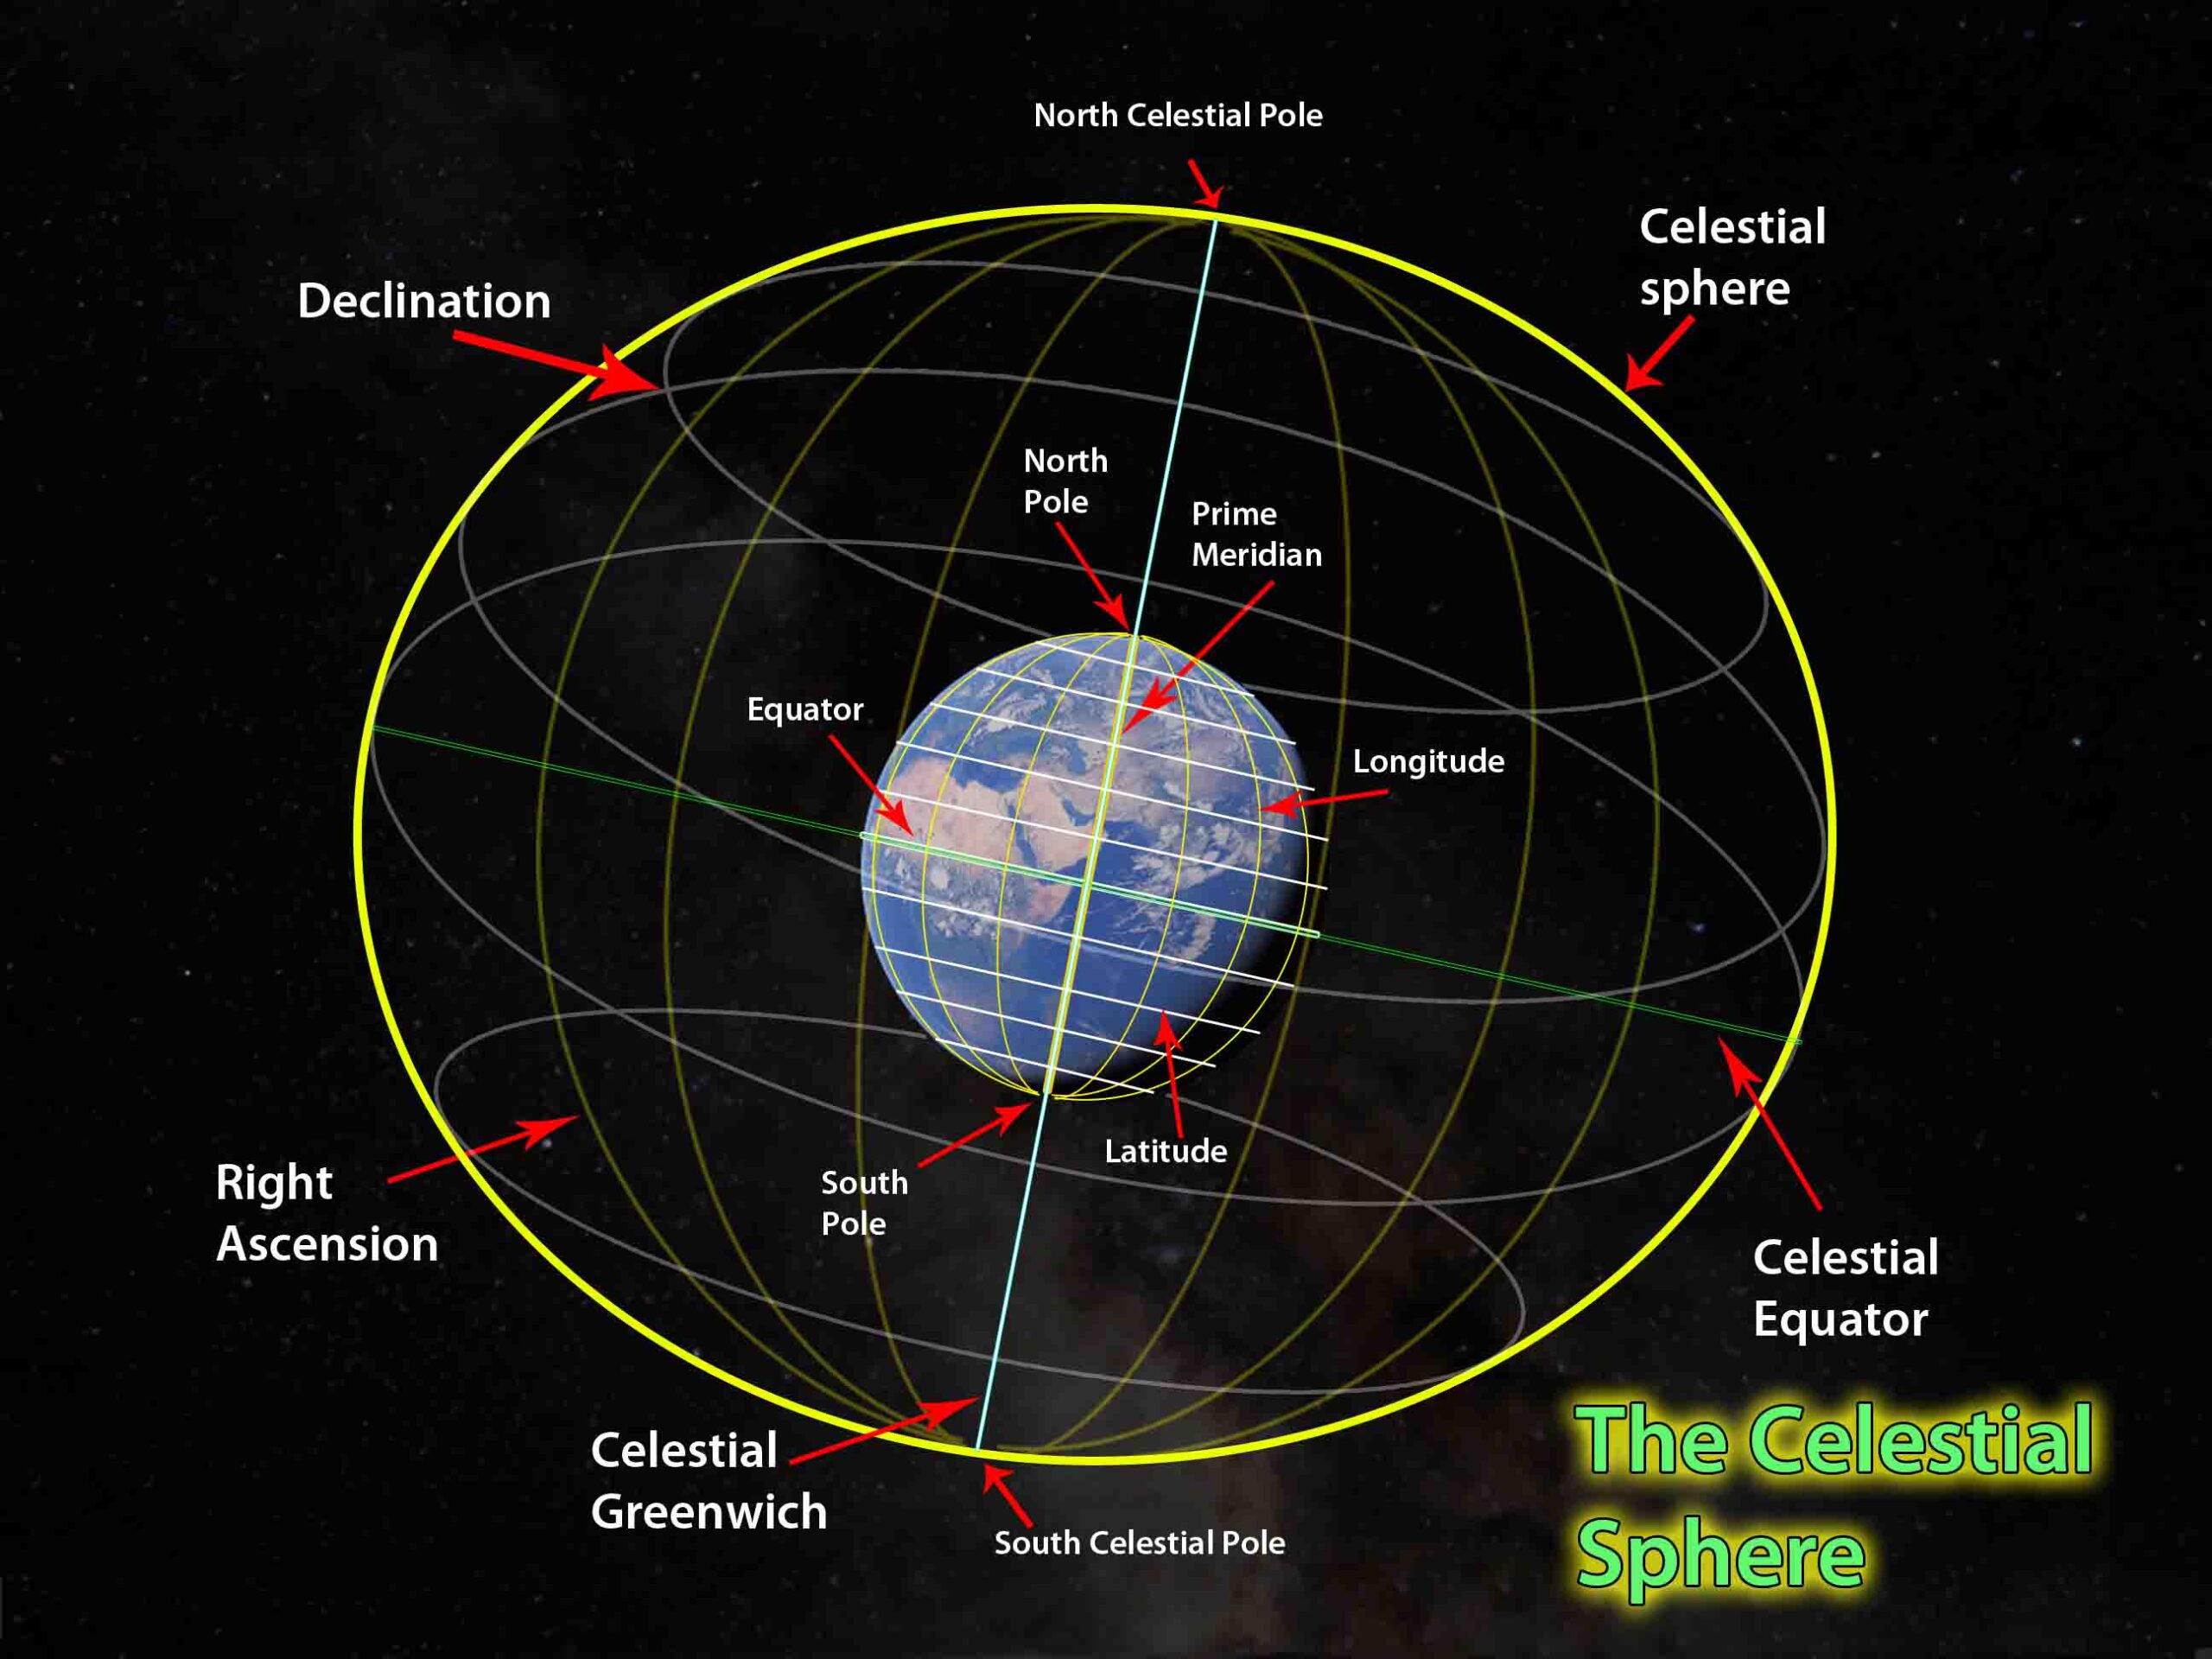 The celestial sphere and its corresponding parts in the earth's coordinates.